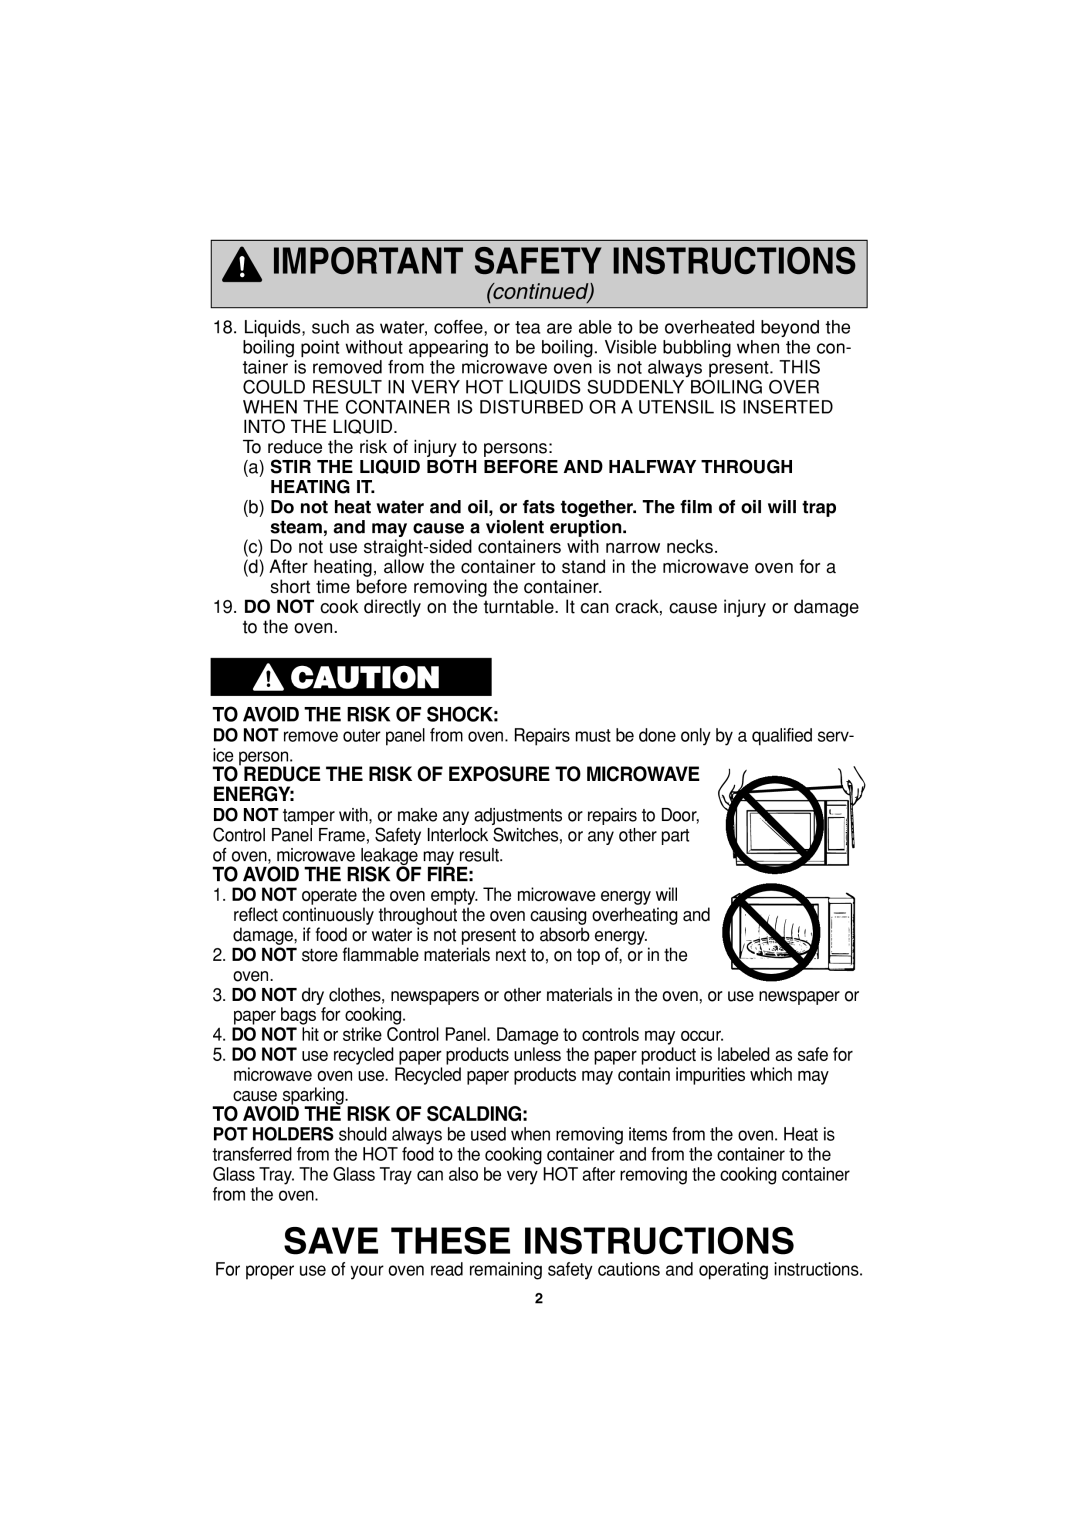 Panasonic NN-T763, NN-S763 Save These Instructions, continued, To Avoid The Risk Of Shock, To Avoid The Risk Of Fire 